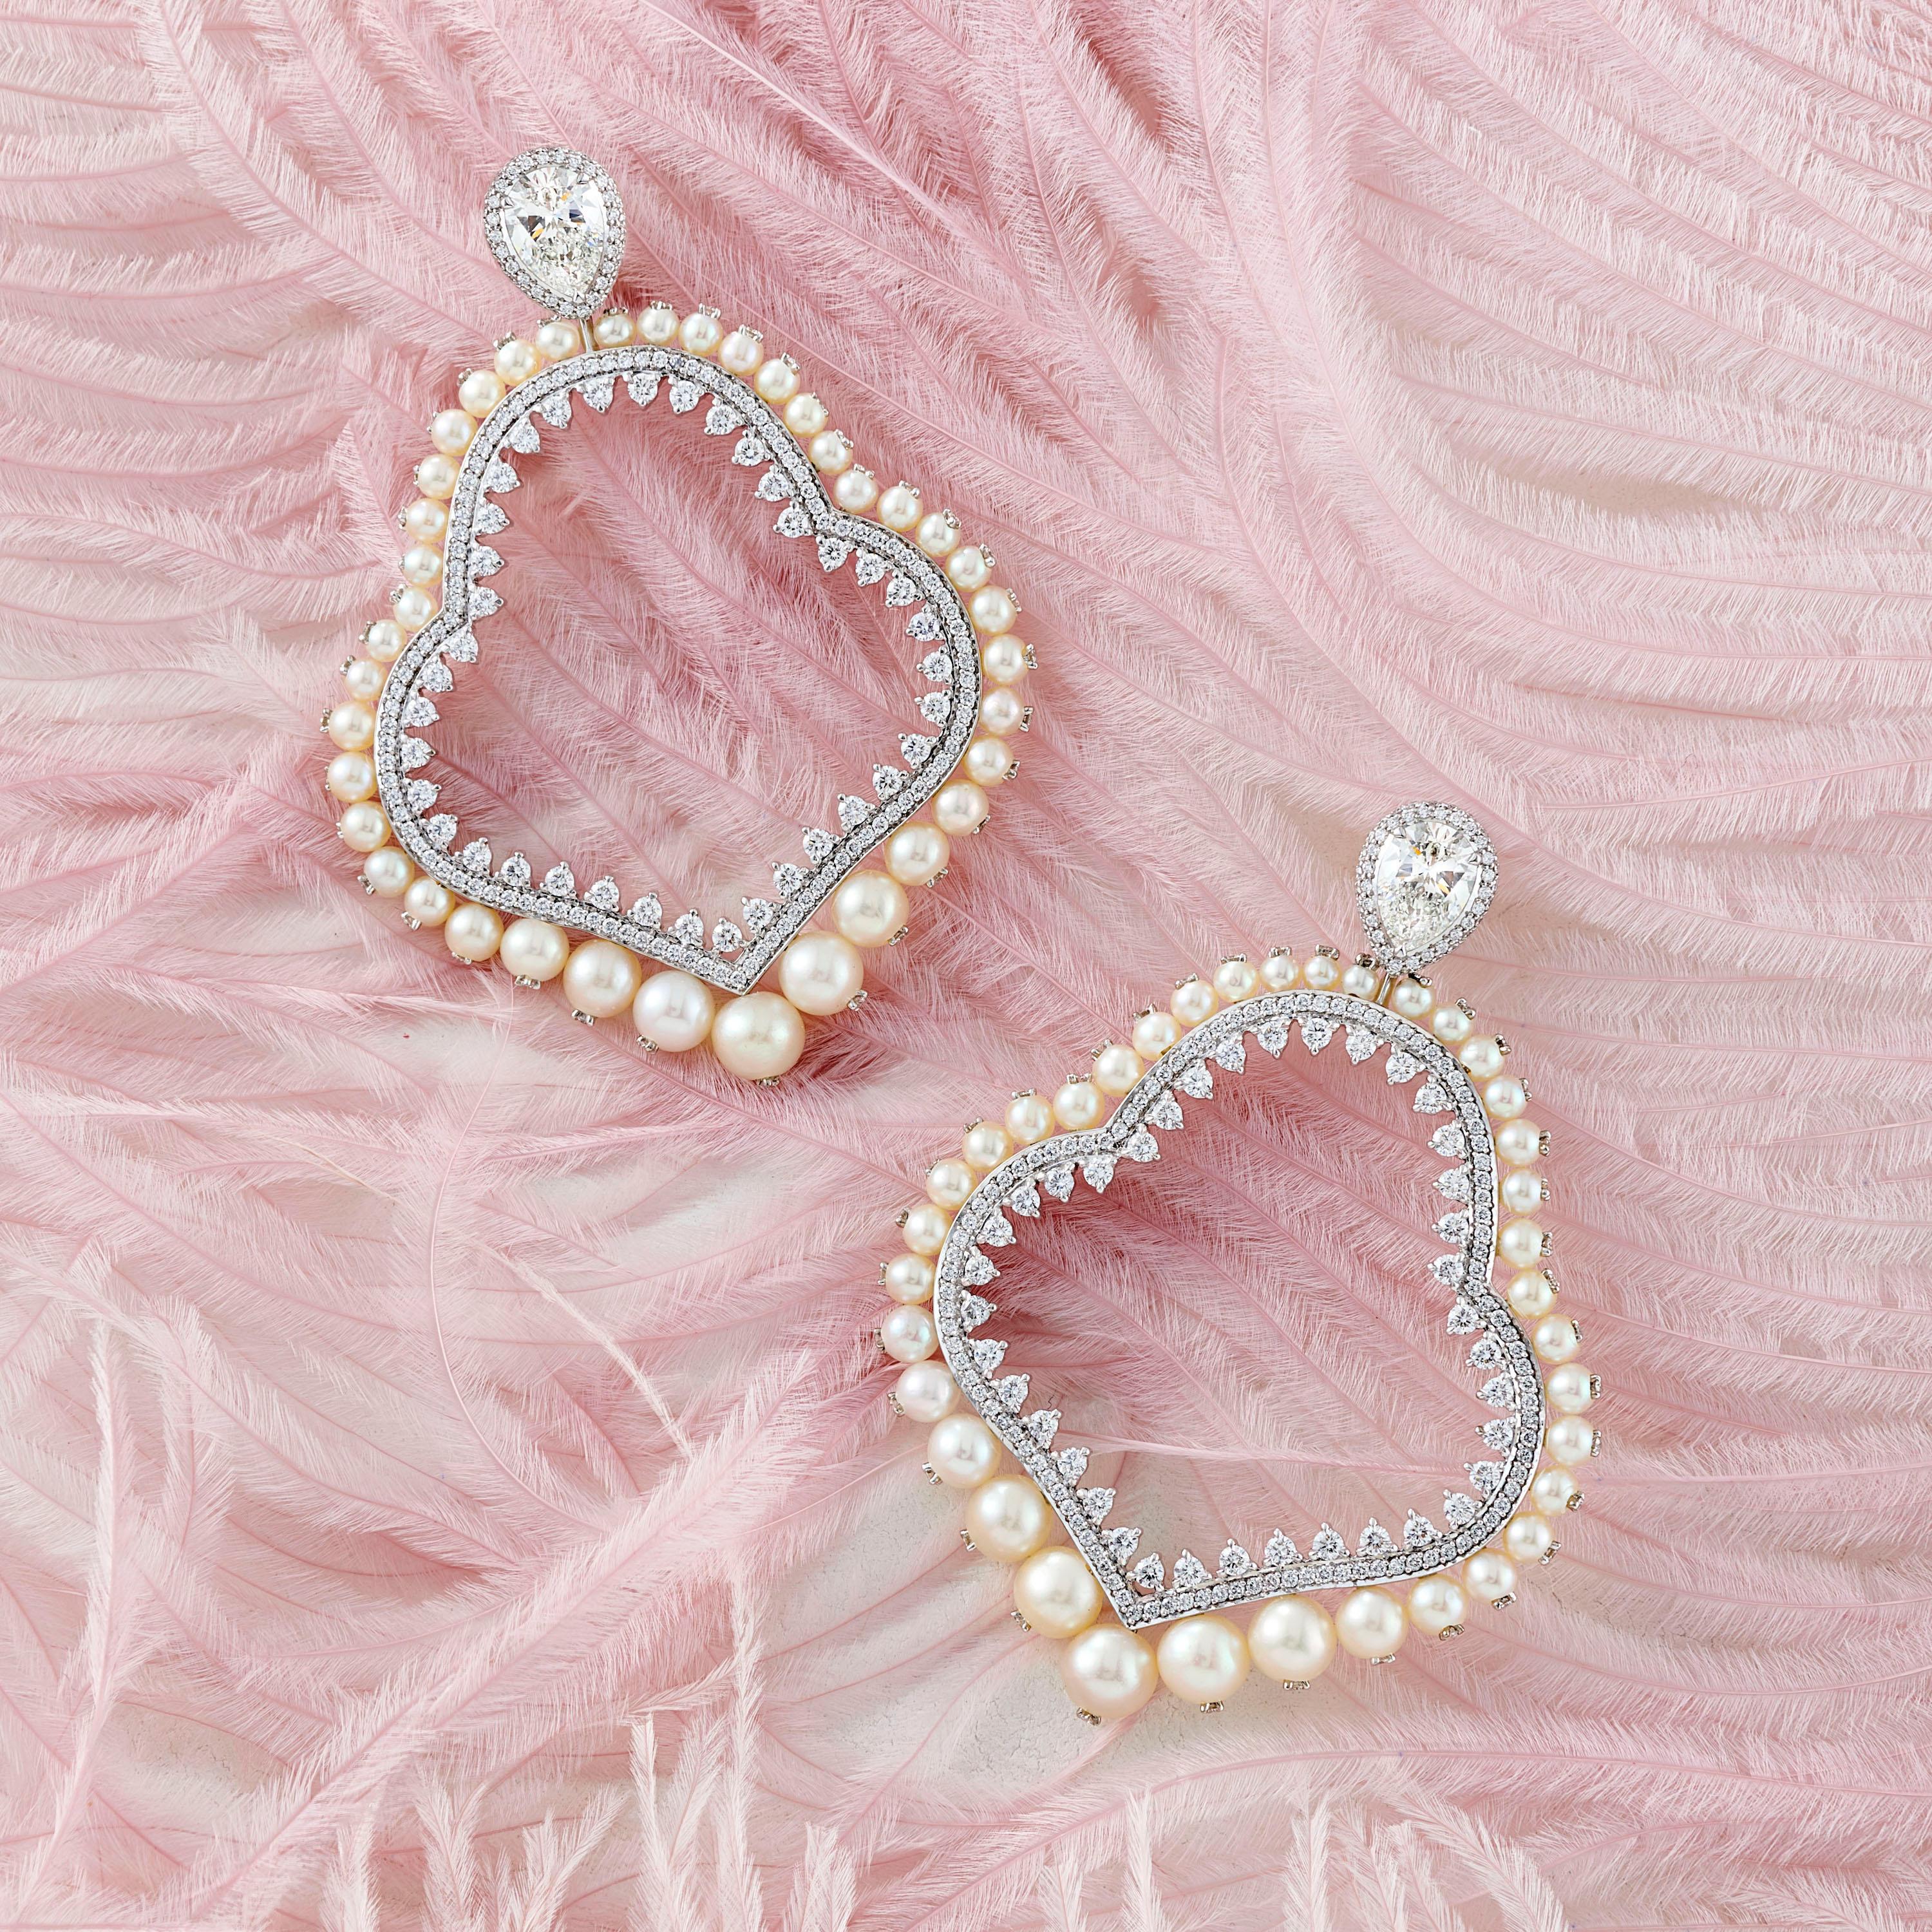 A Pair of Natural Pearl and Diamond Gold Earrings by Jewelry Designer, Sarah Ho.

Natural Pearls (76 pcs) from an antique Basra Pearl necklace with two pear cut H VS diamonds of 1.01ct and 1ct and 3.36ct round diamonds set in 18kt white gold.  The